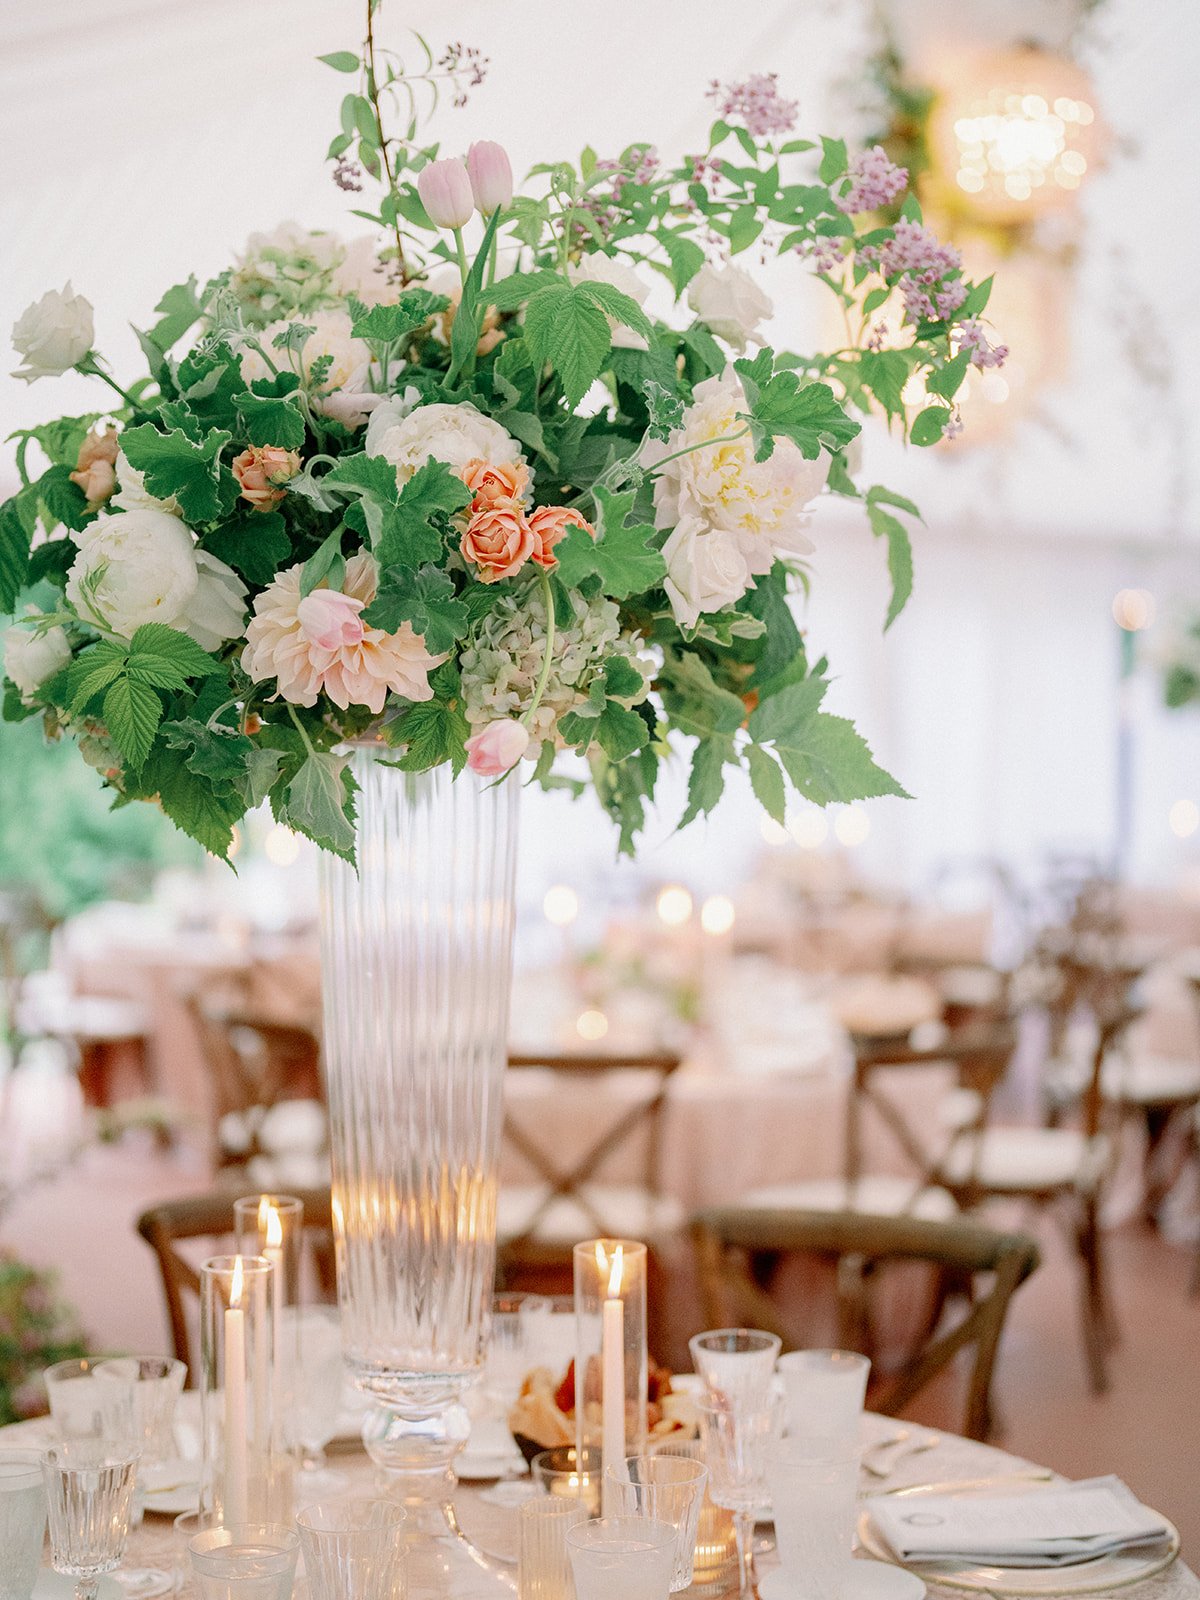 Tall elegant garden style wedding centerpiece with blush, ivory and greenery